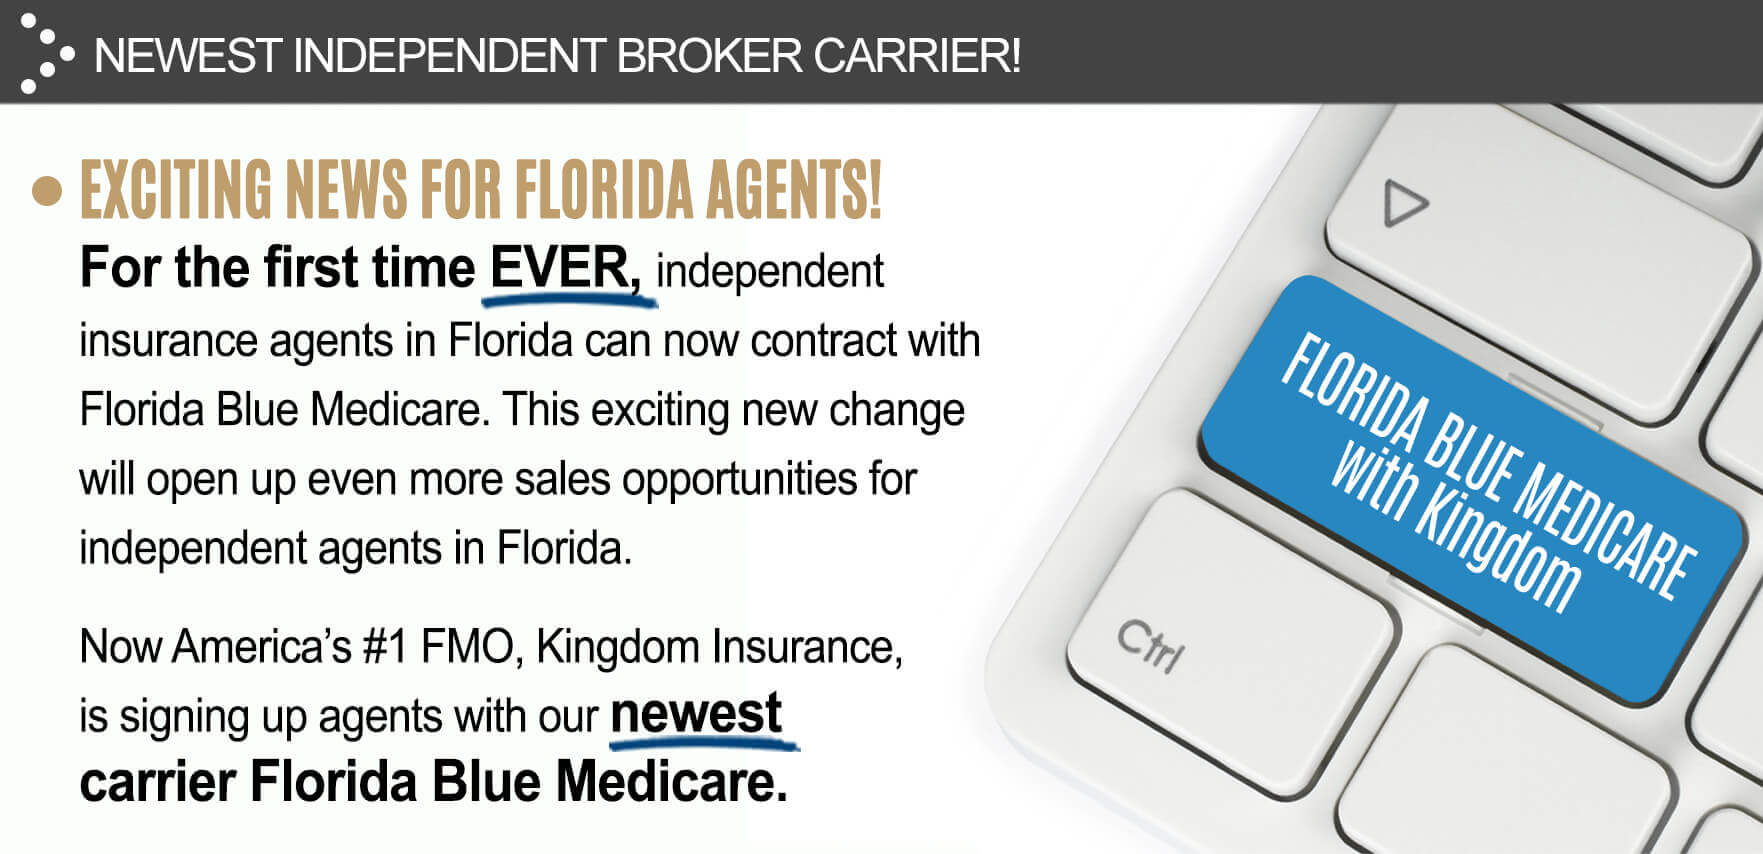 Newest Independent broker carrier! Exciting news for Florida agents! For the first time ever, independent insurance agents in Florida can now contract with Florida Blue Medicare. This exciting new change will open up even more sales opportunities for independent agents in Florida. Now Americaâ€™s #1 FMO, Kingdom Insurance, is signing up agents with our newest carrier Florida Blue Medicare.